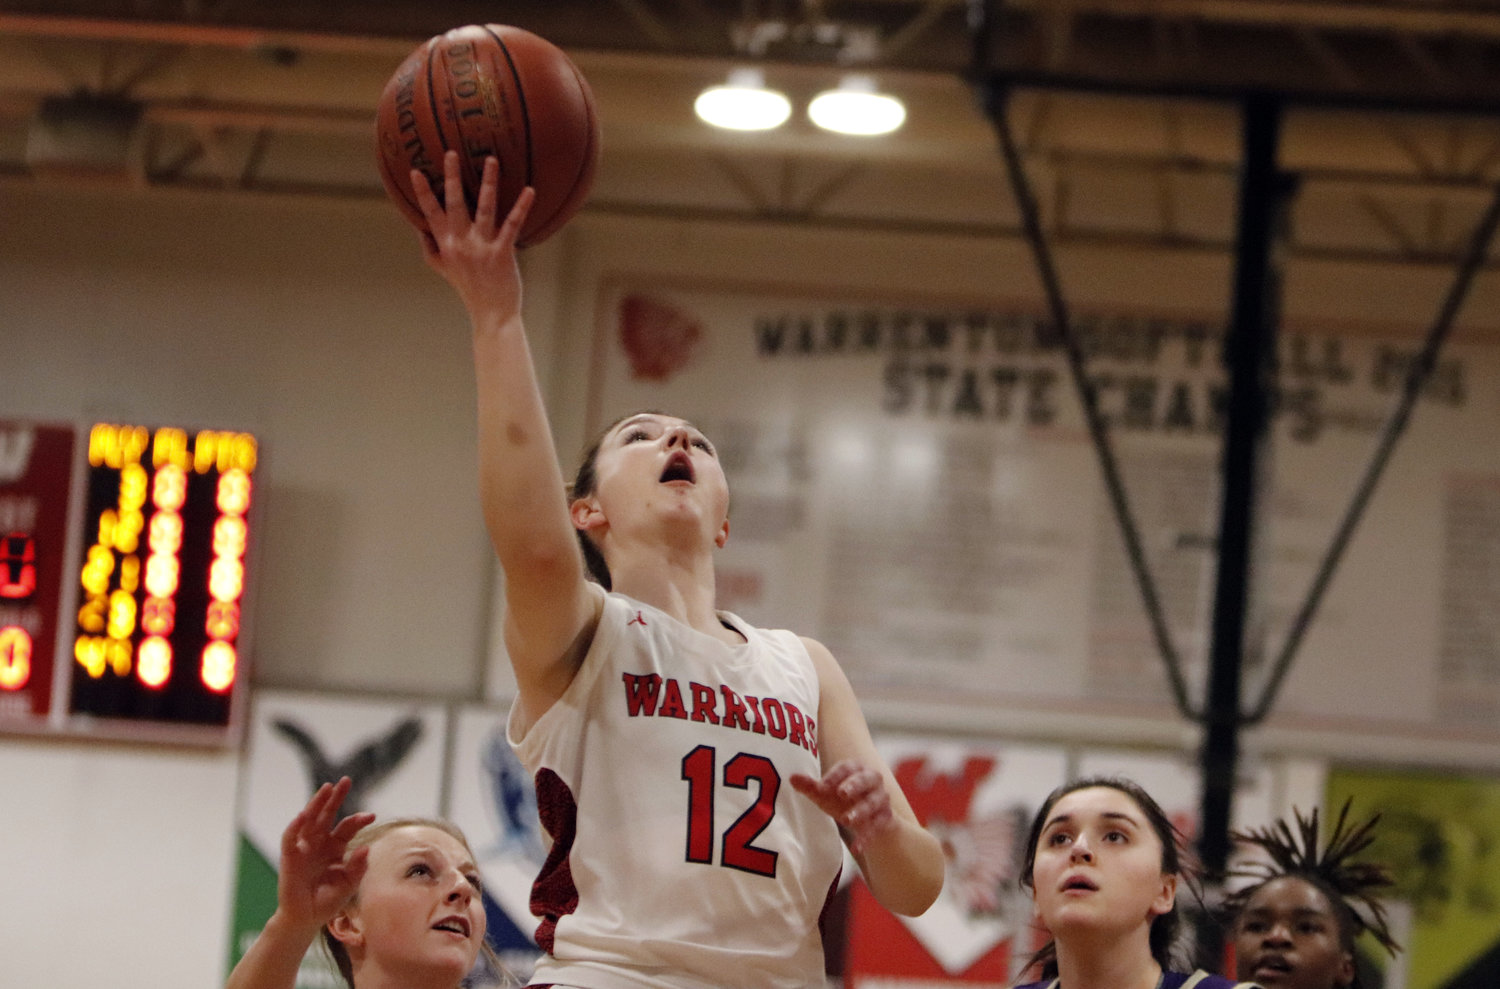 Warrenton senior Audrey Payne prepares goes up for a layup during the first half of Warrenton’s win over Hallsville.